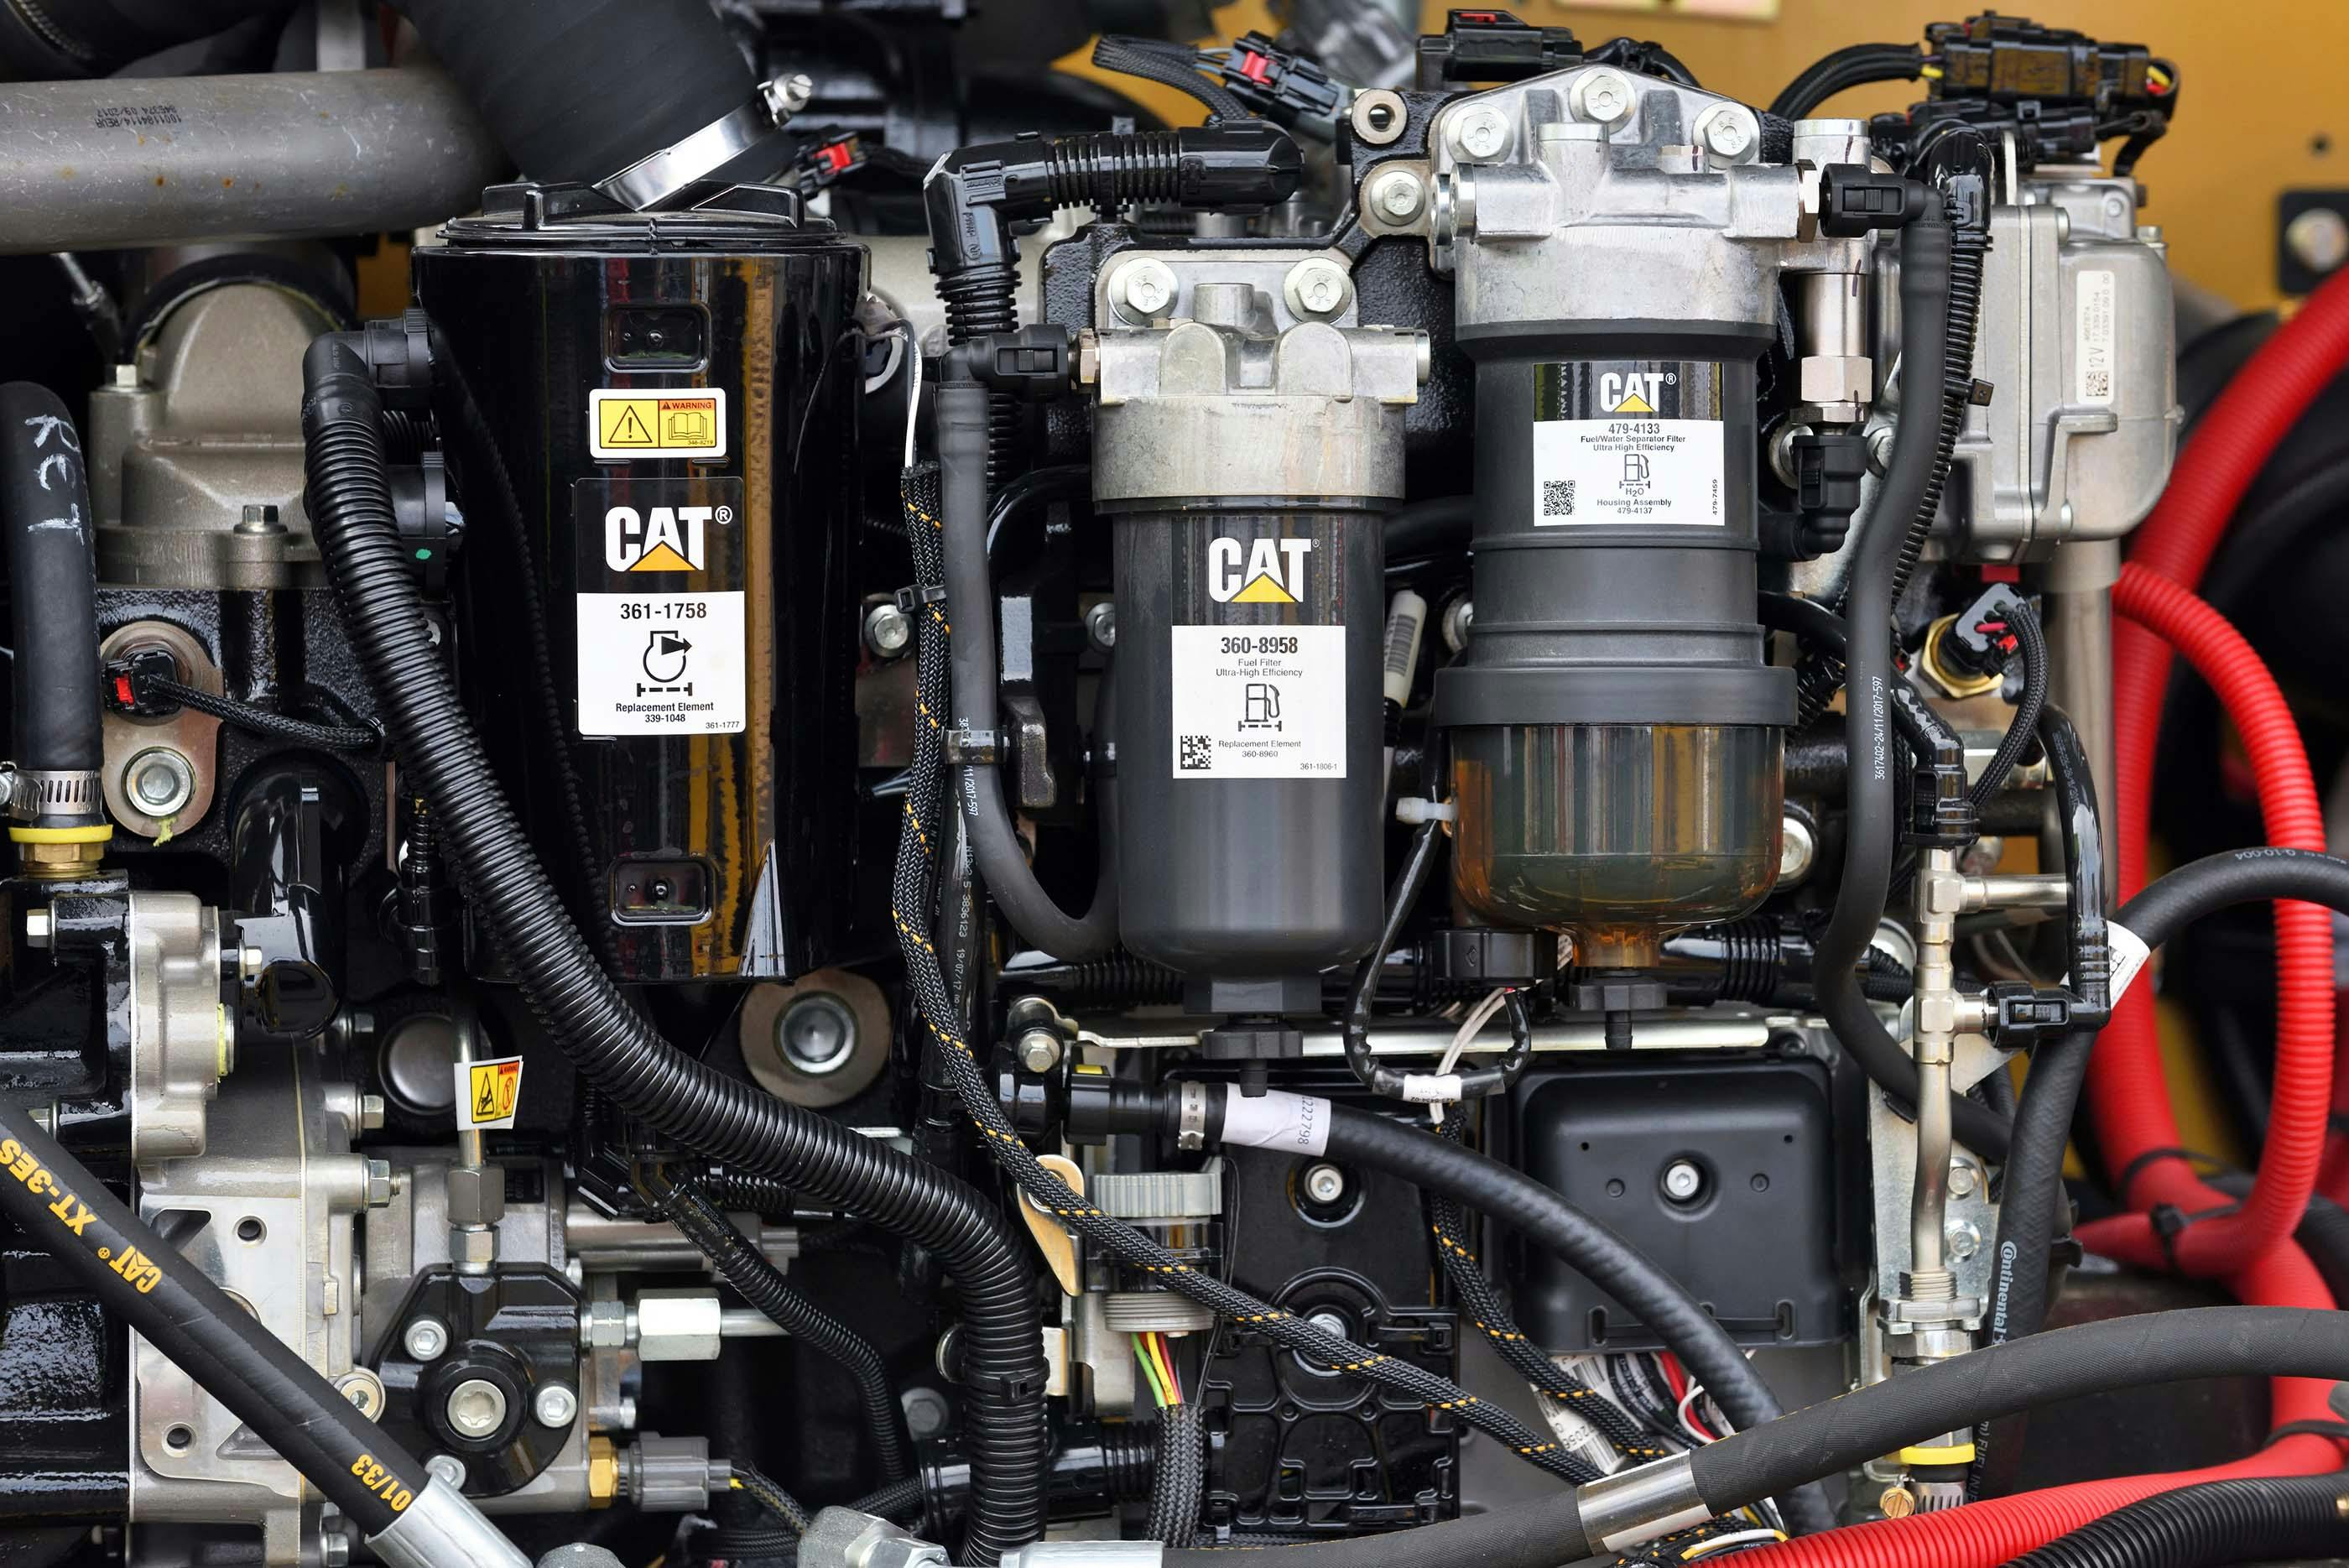 Cat Engine with Filters and Hoses